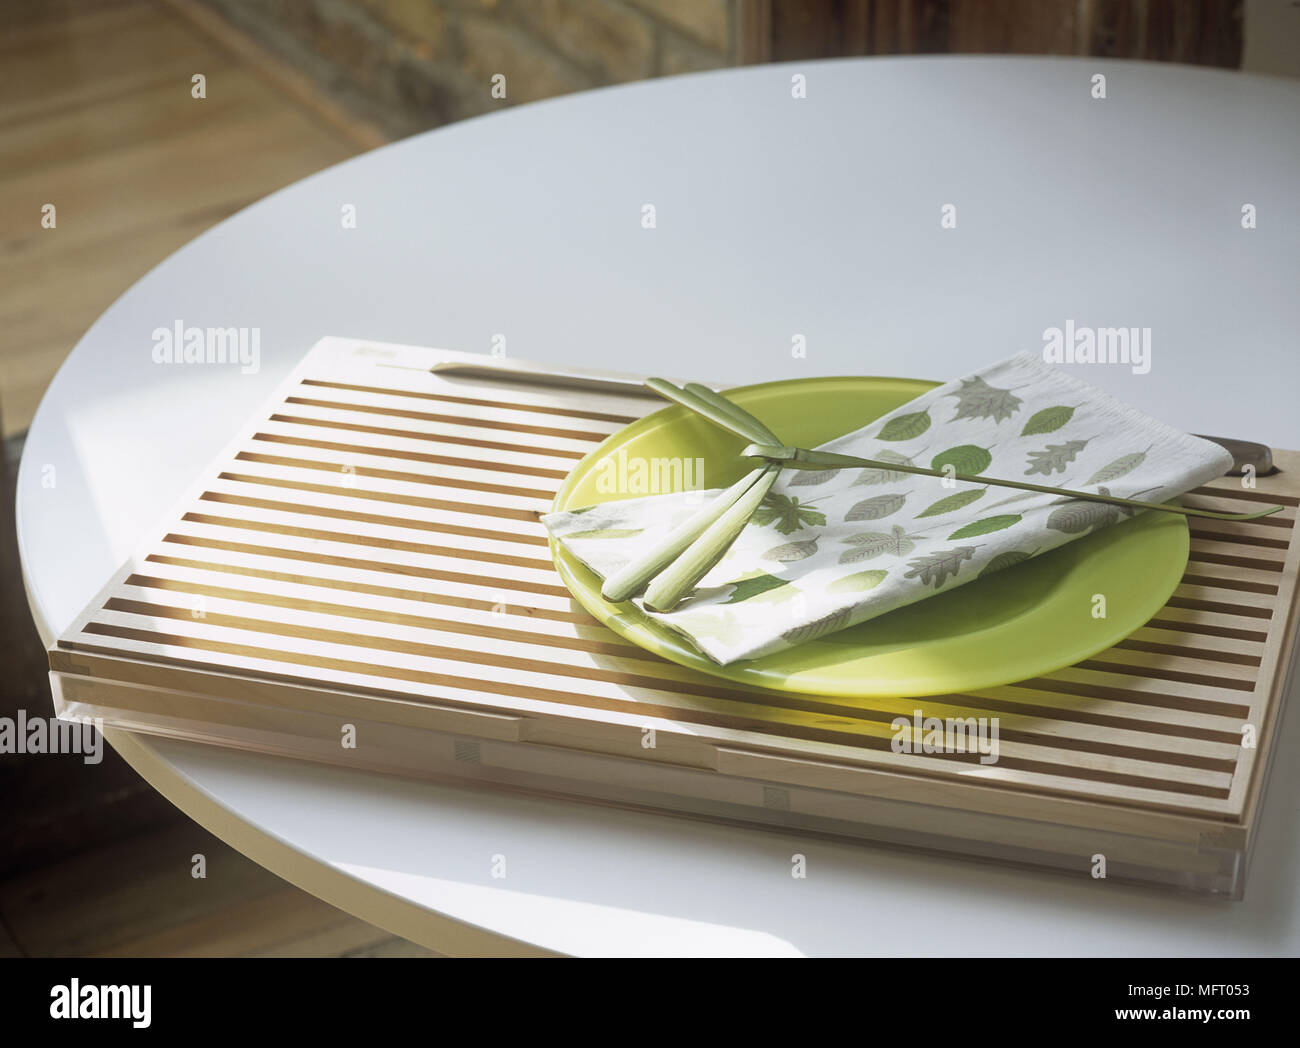 White circular table with wooden tray green plate and napkin with leaf motif and palm frond on top Stock Photo